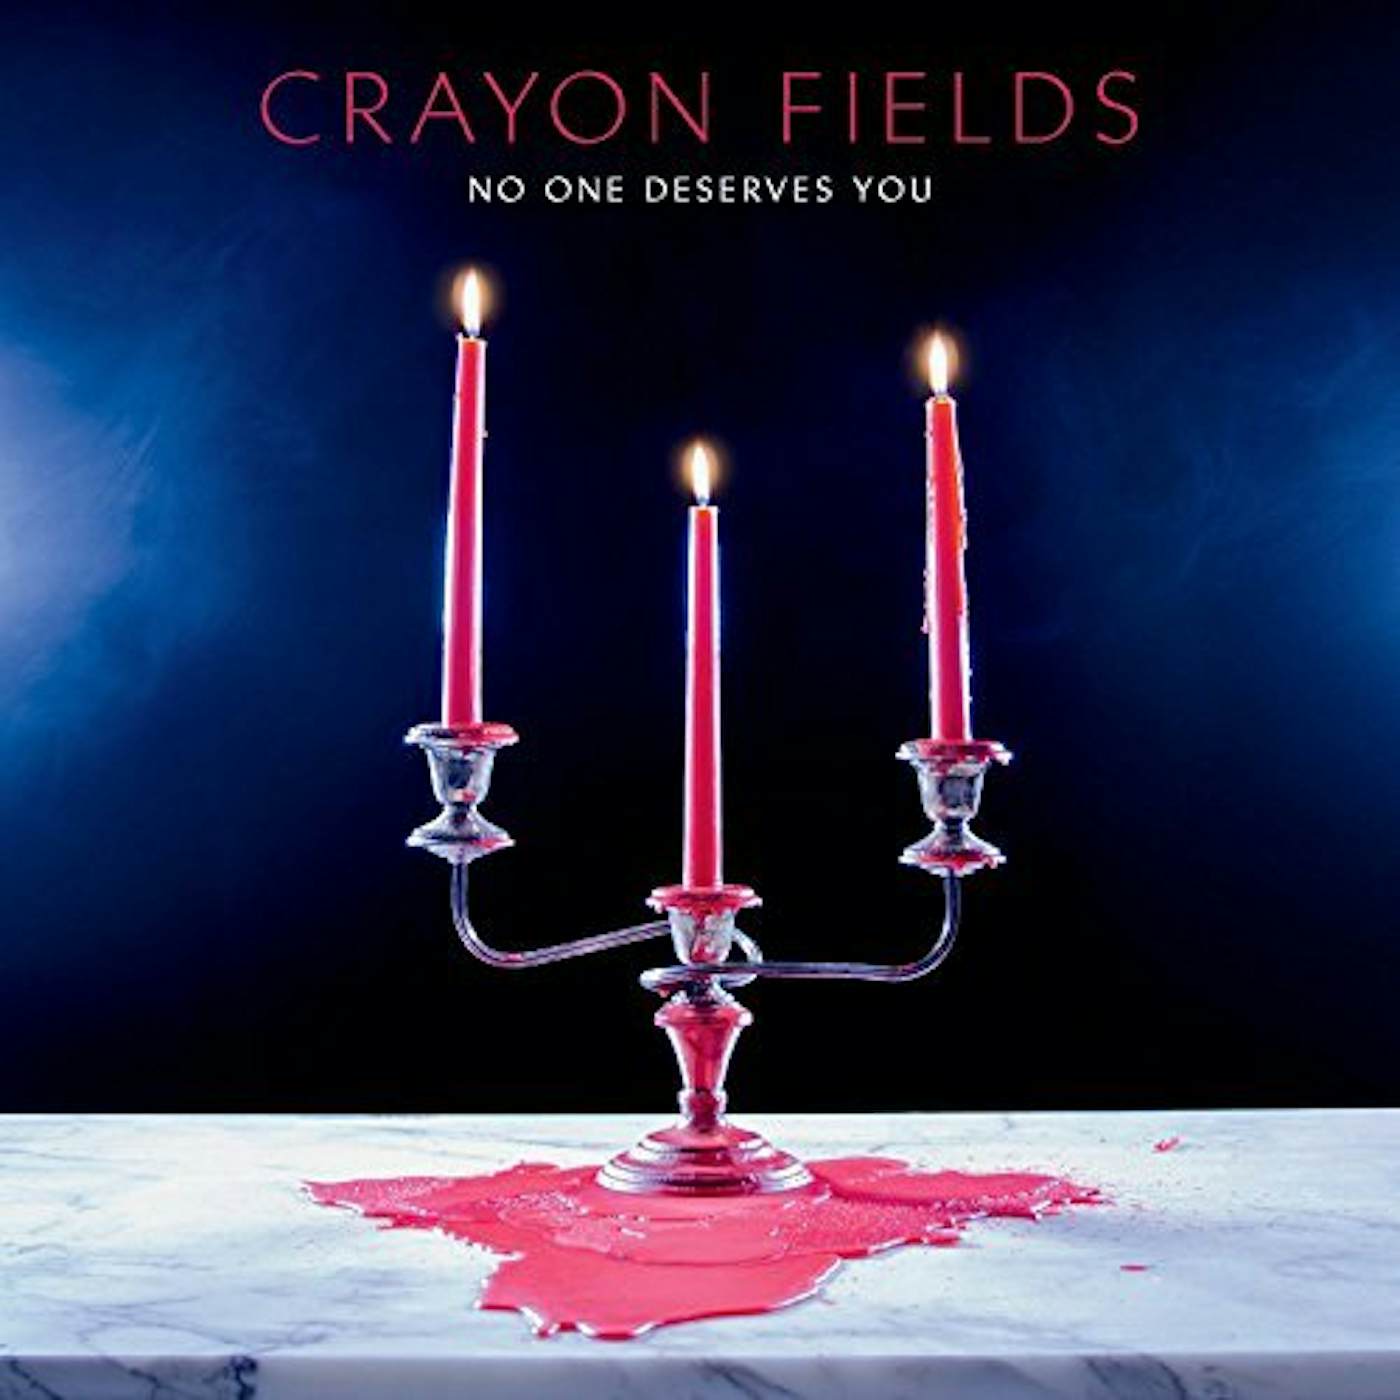 The Crayon Fields No One Deserves You Vinyl Record